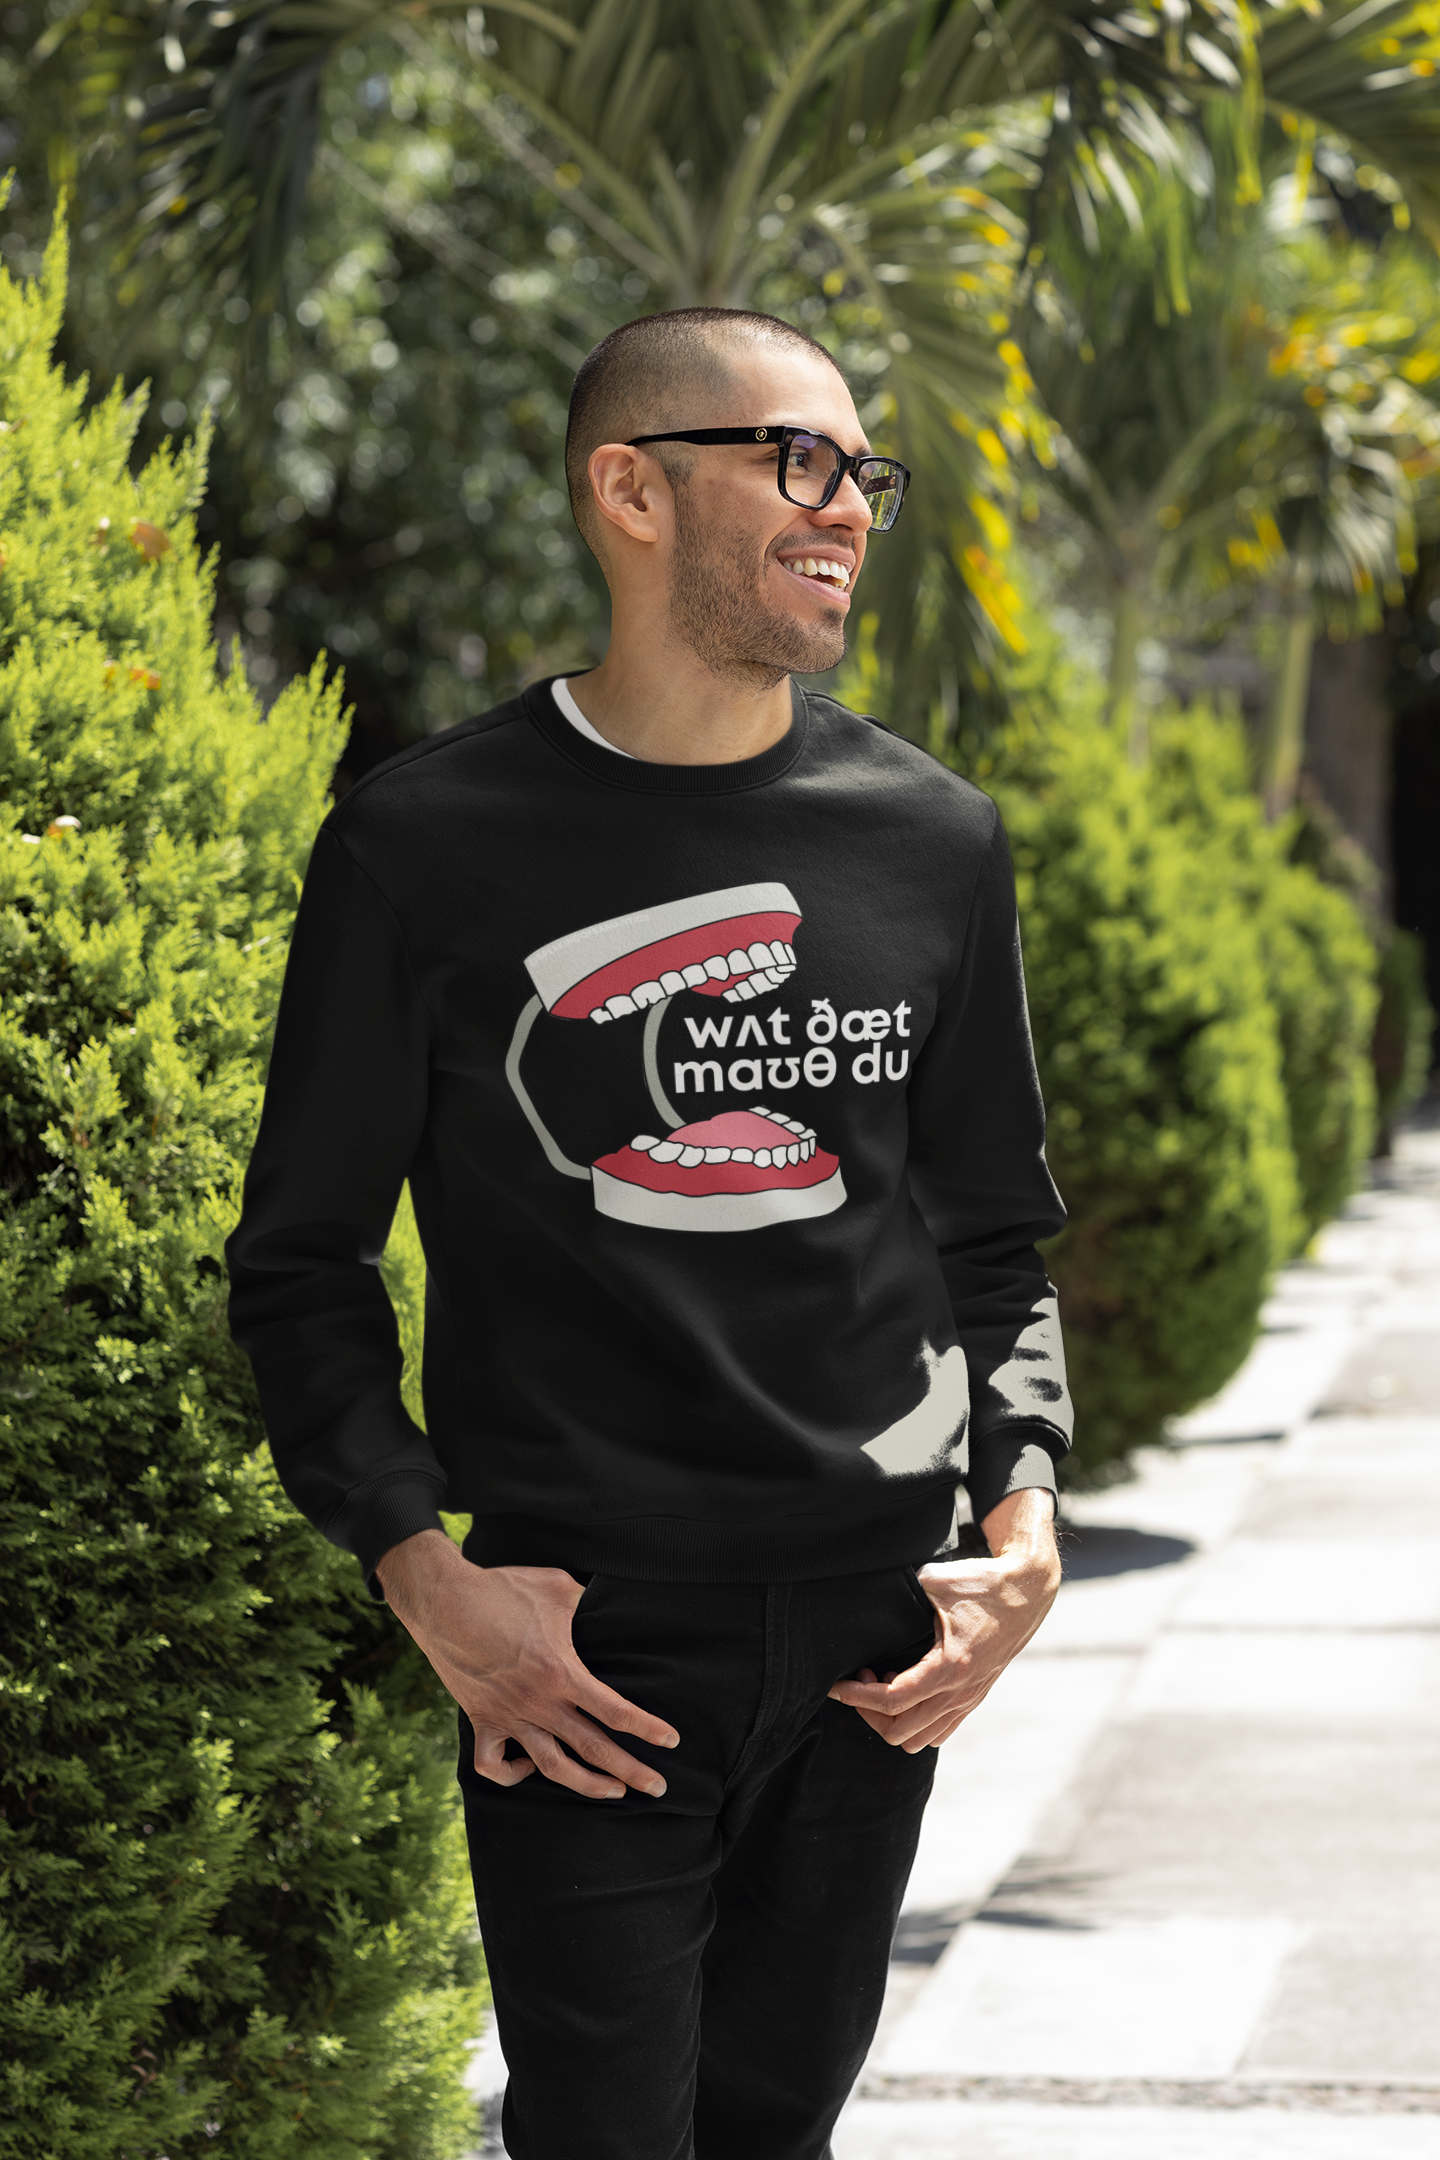 What that Mouth Do (IPA) Crewneck